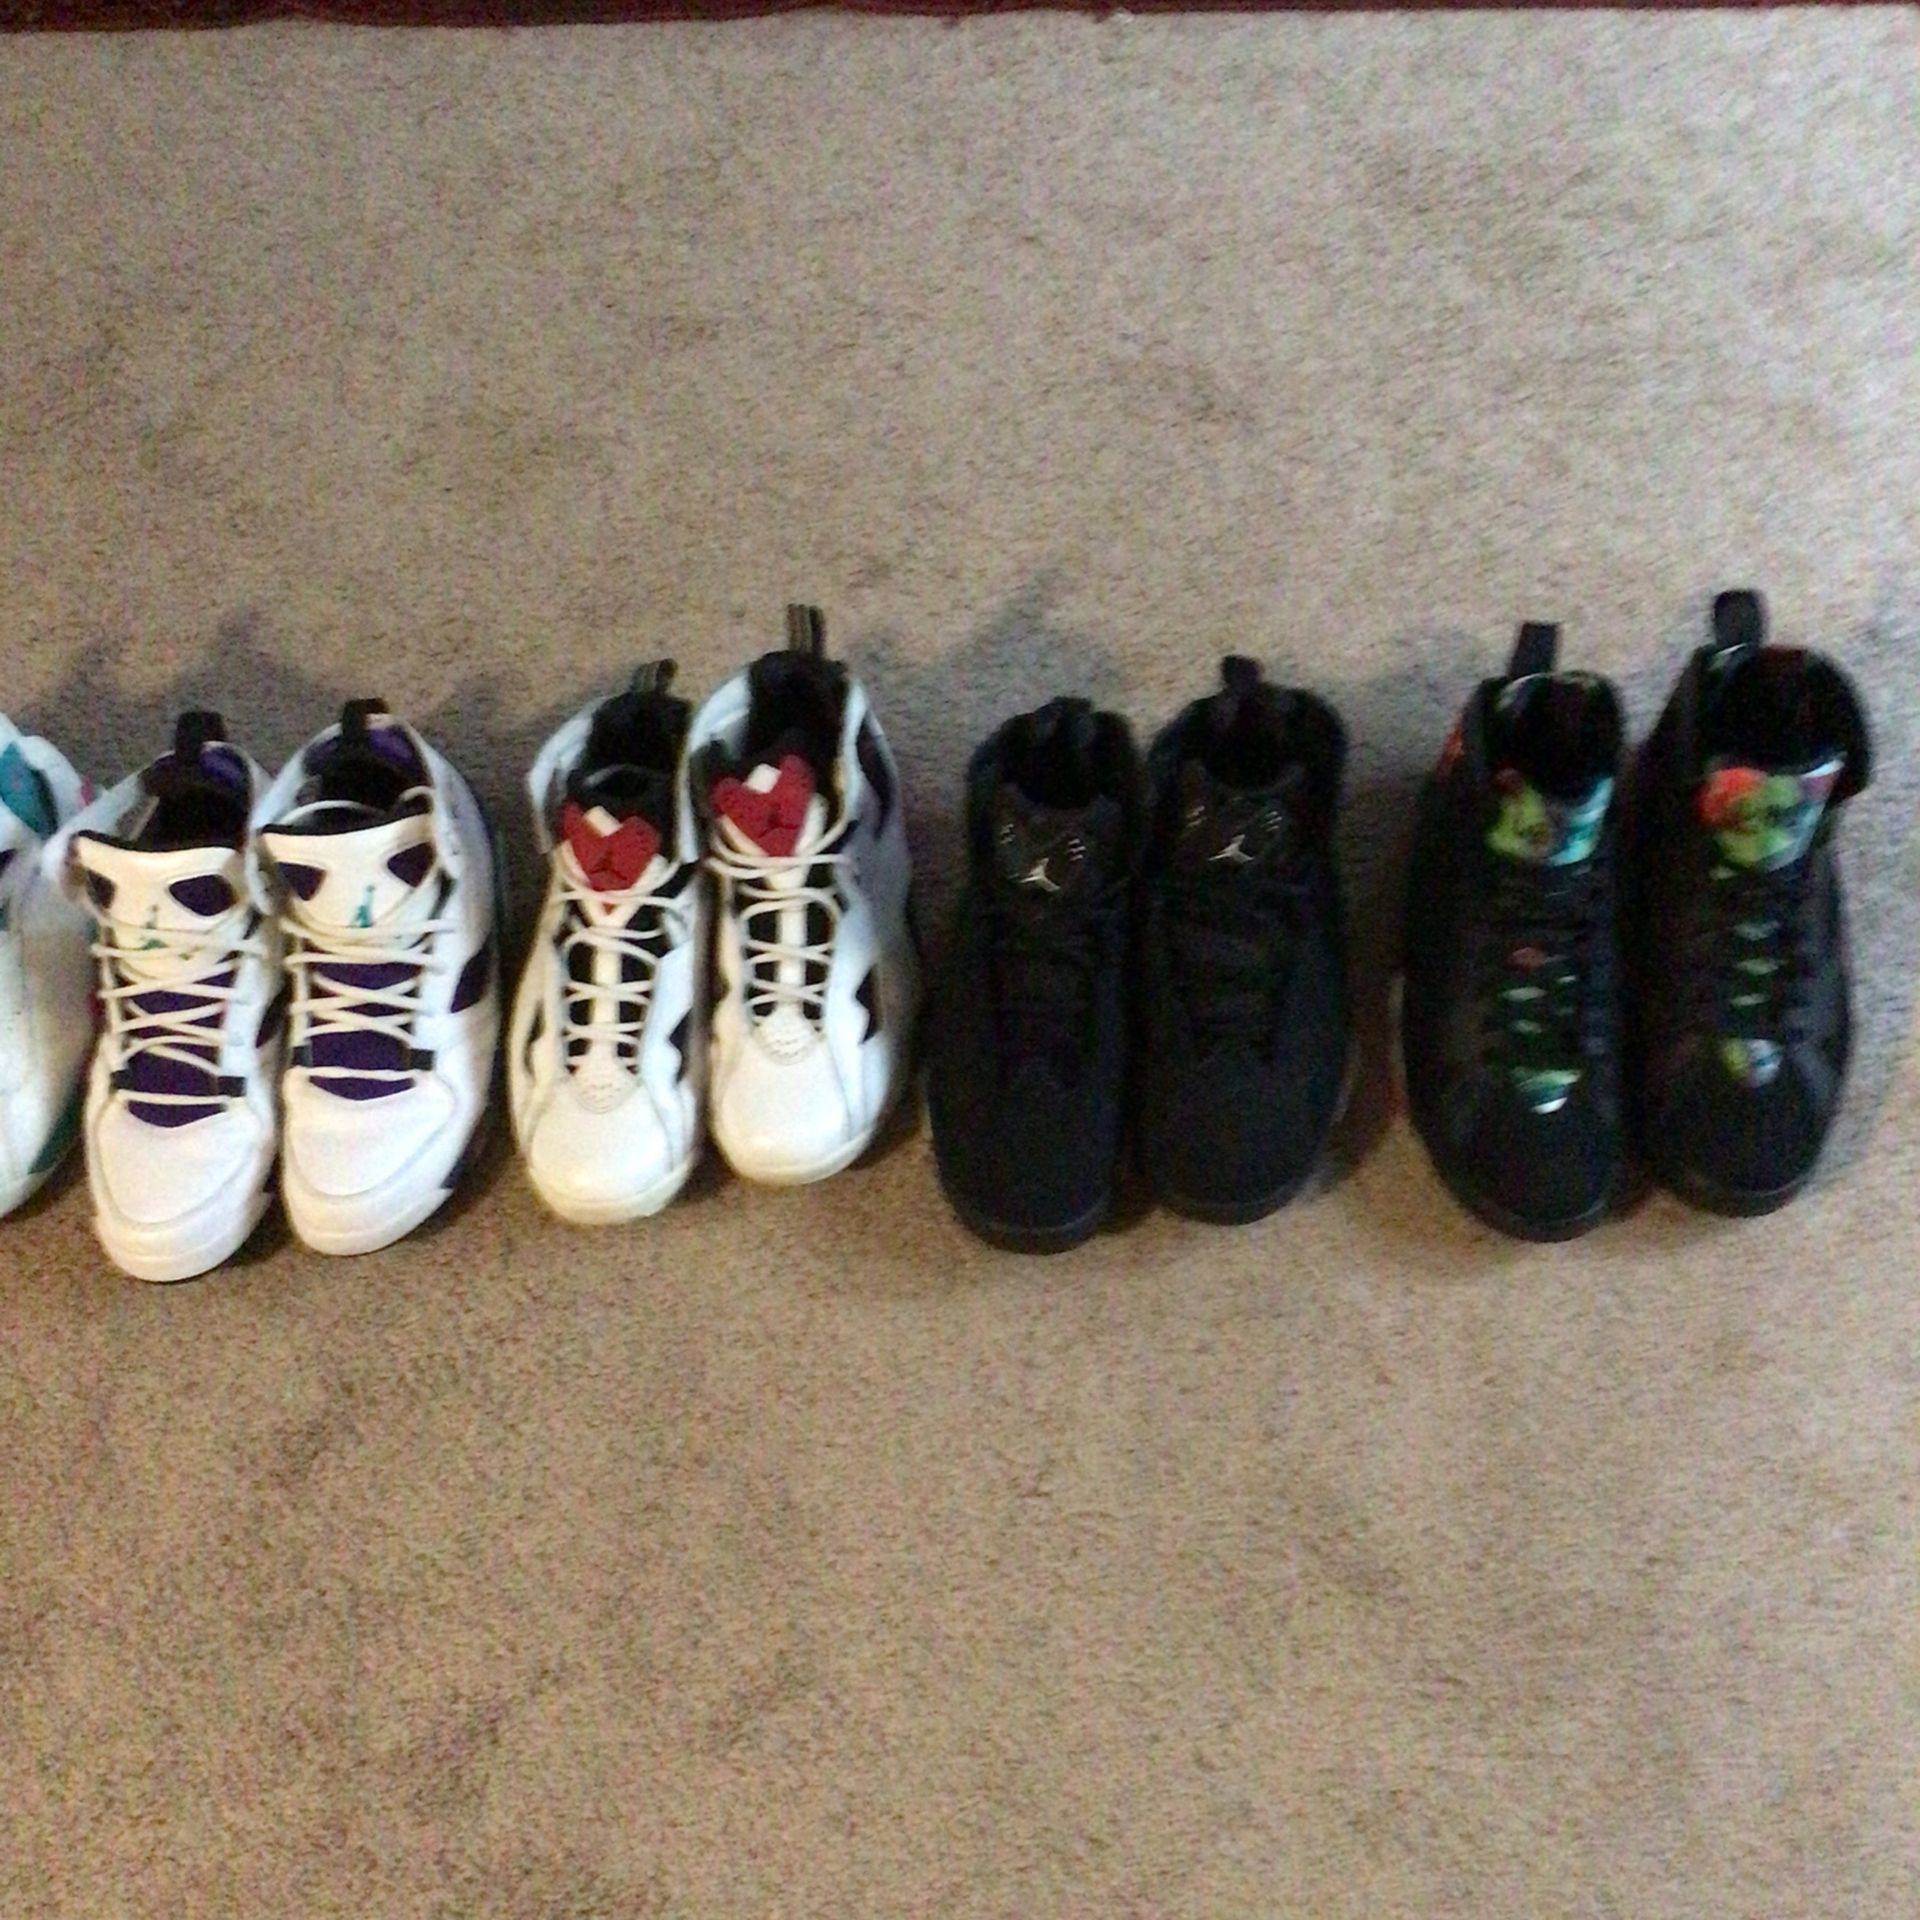 Jordan’s And Air Max Size 8 In Brand New Condition Been Sitting In Closet